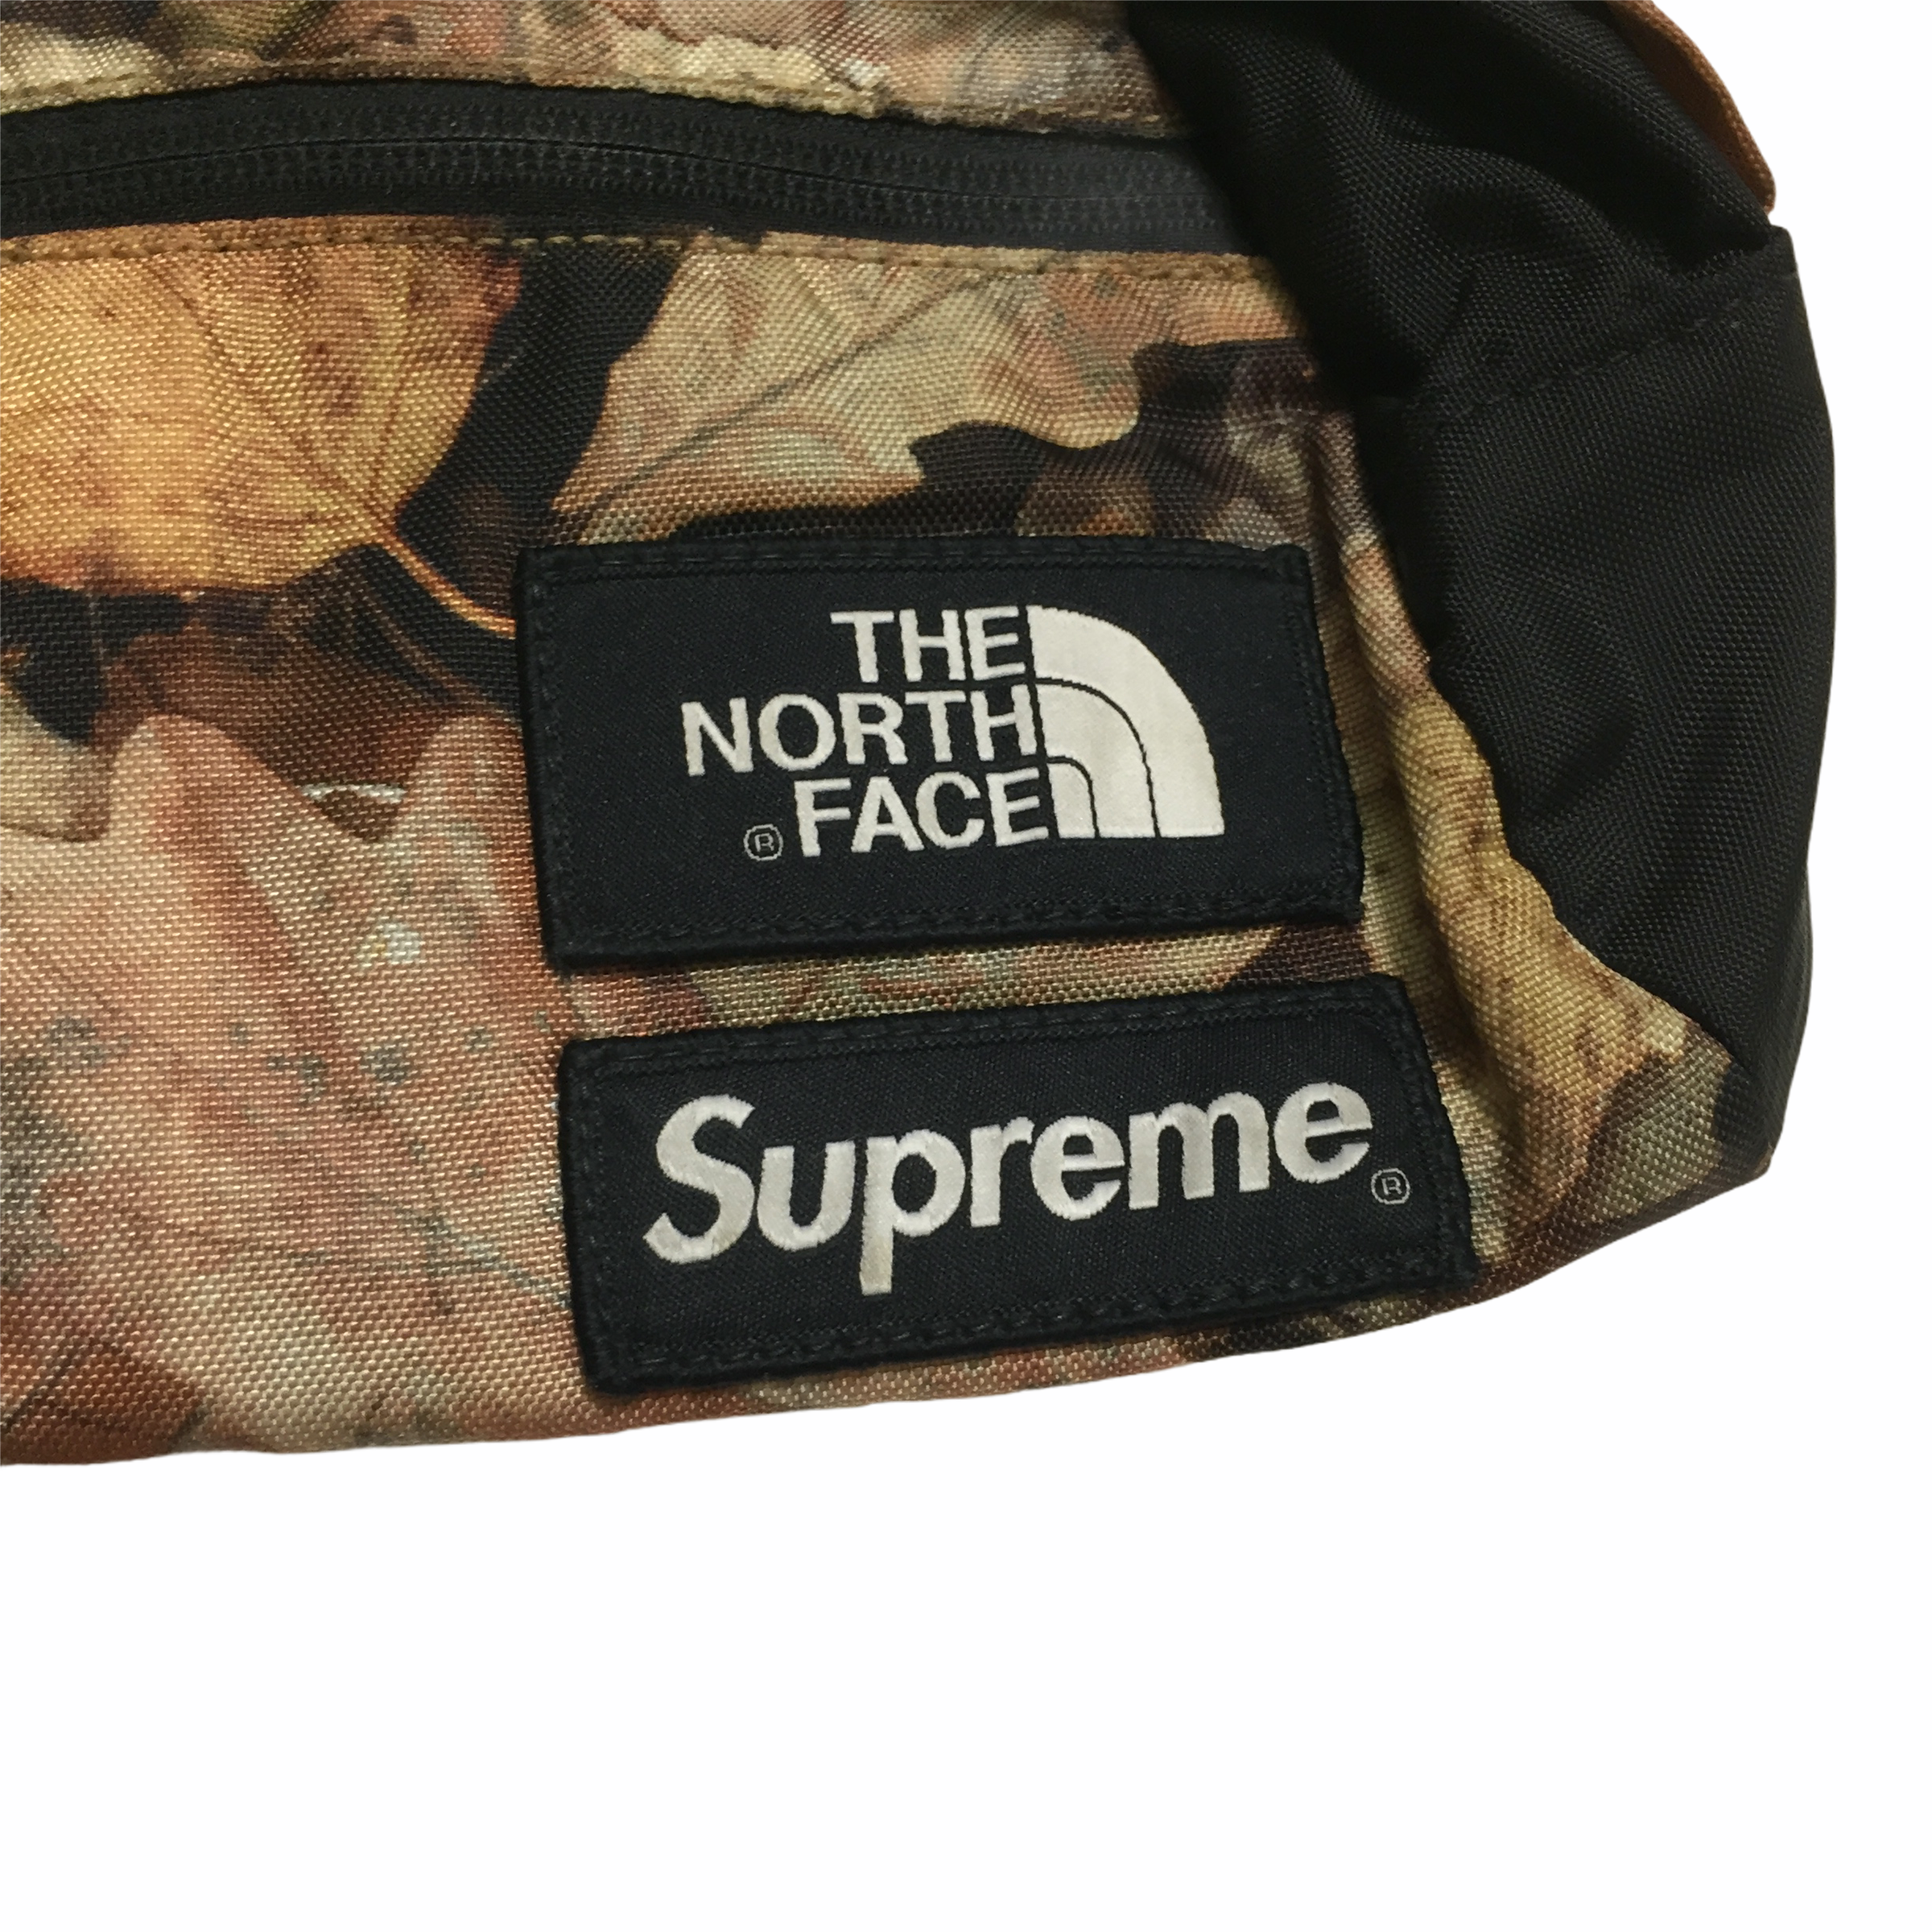 2016 Supreme x The North Face Leaves Waist Bag